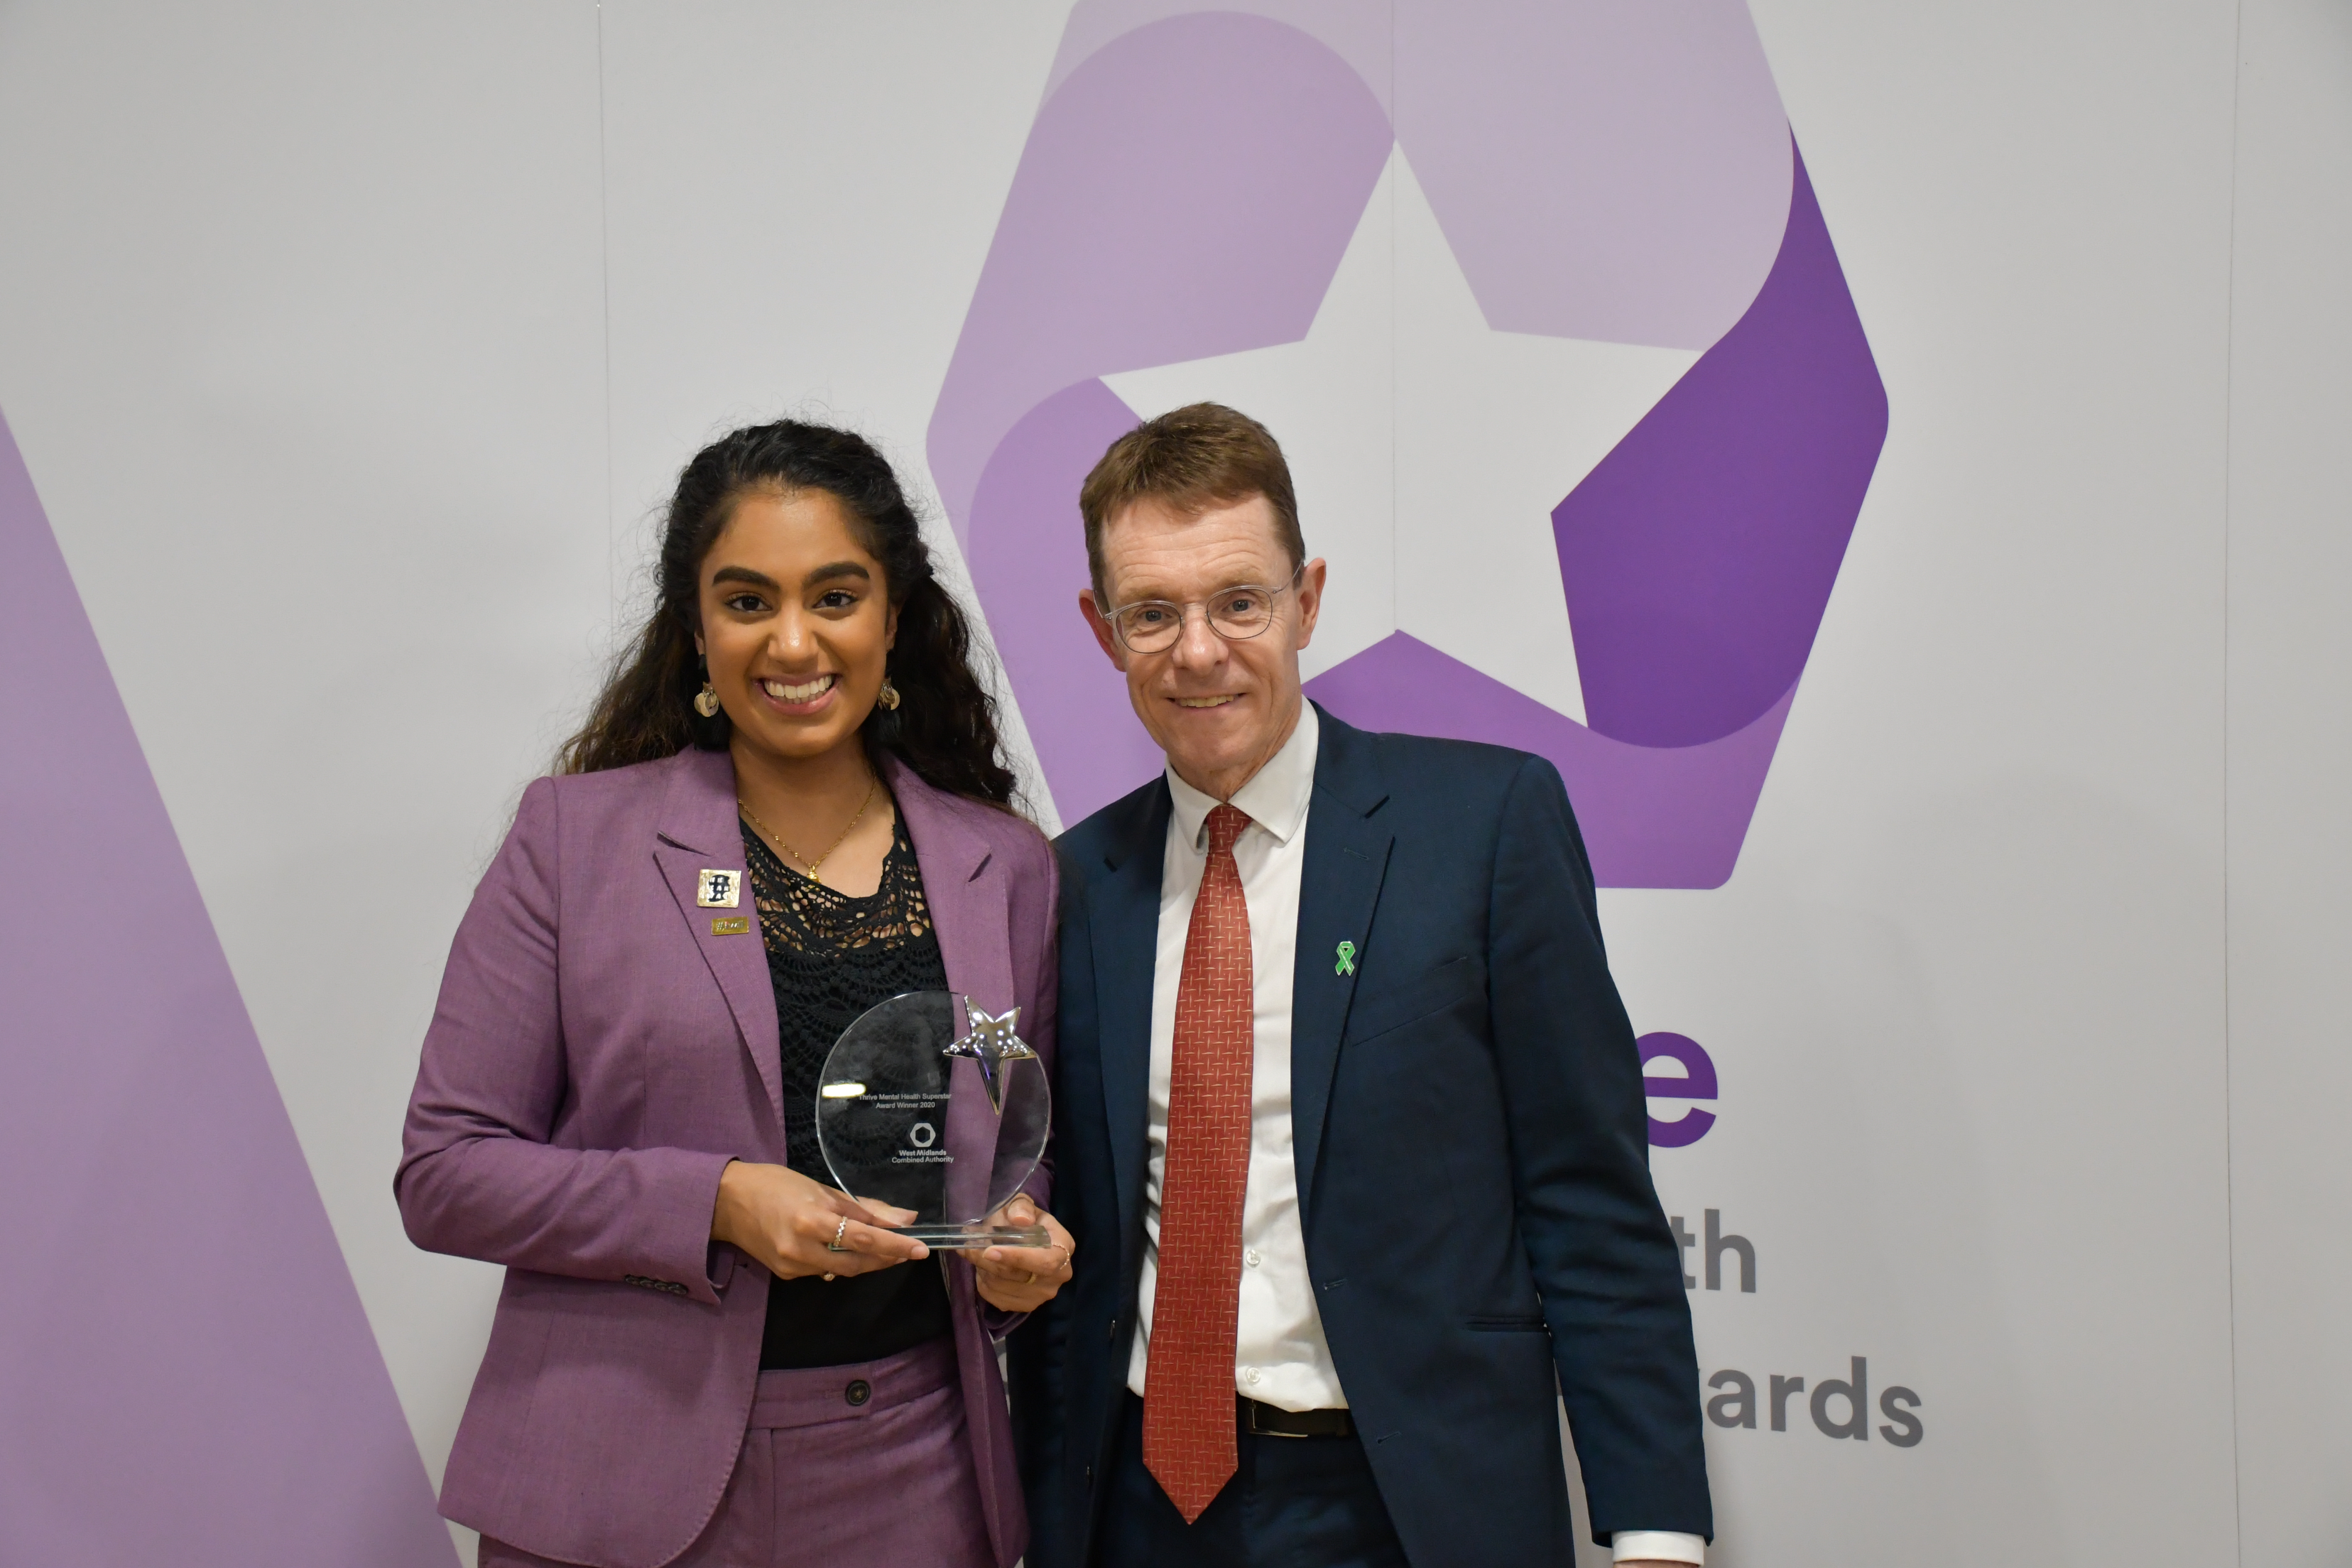 Sophia Badhan is pictured with Mayor of the West Midlands Andy Street at the Thrive awards earlier this year